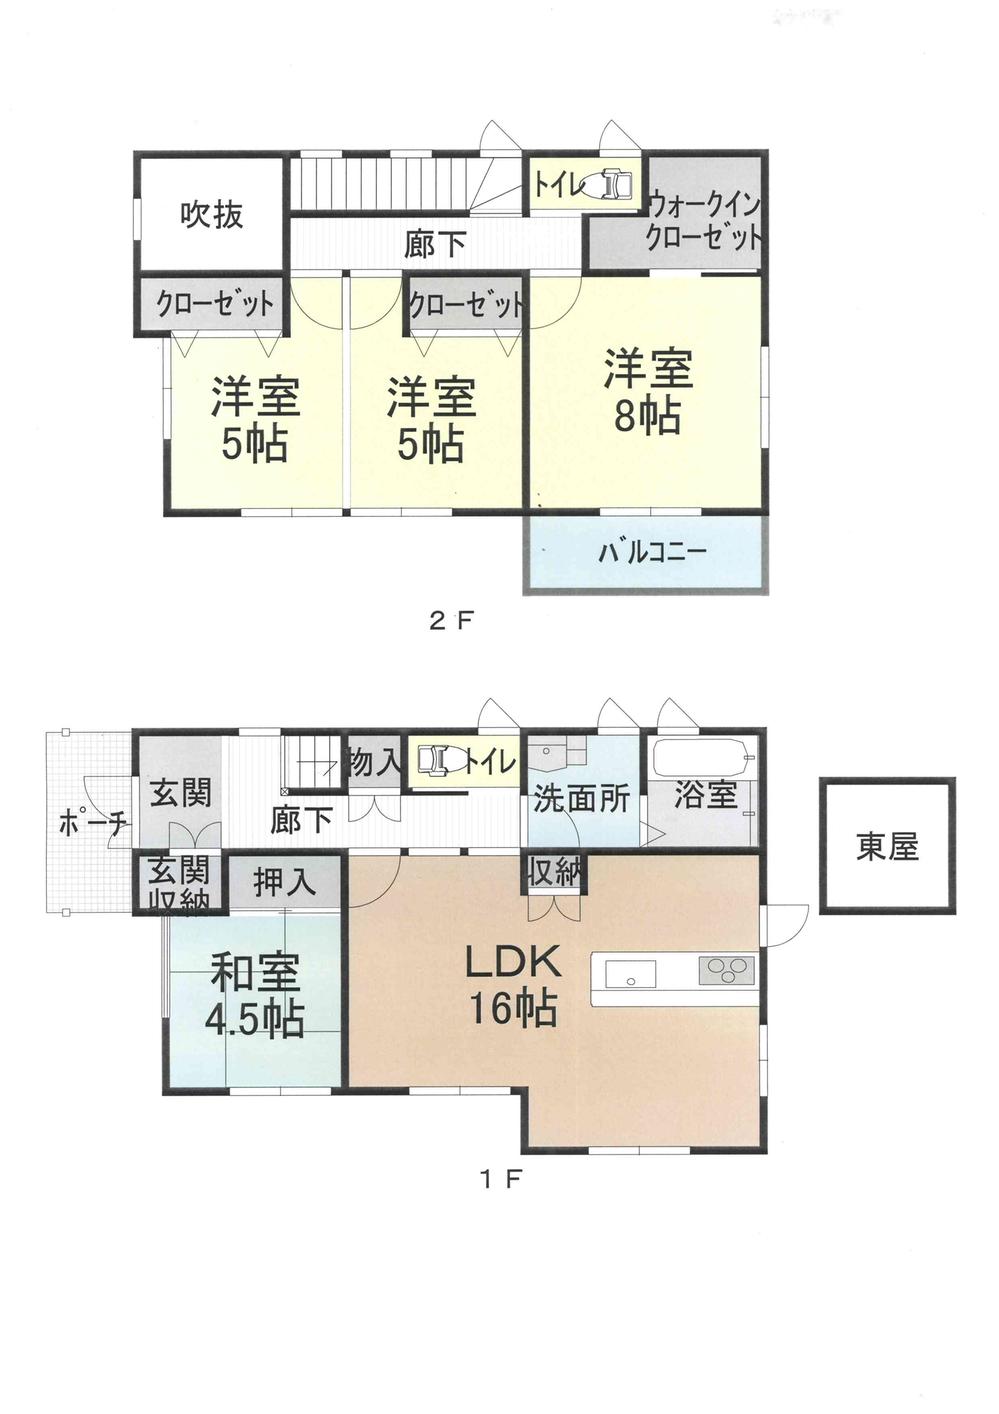 Floor plan. 34,800,000 yen, 4LDK + S (storeroom), Land area 167.15 sq m , Building area 101.02 sq m 4LDK + walk-in cloakroom + entrance storage + pantry + stairs bottom storage + comfortable living space of all the living room storage! 